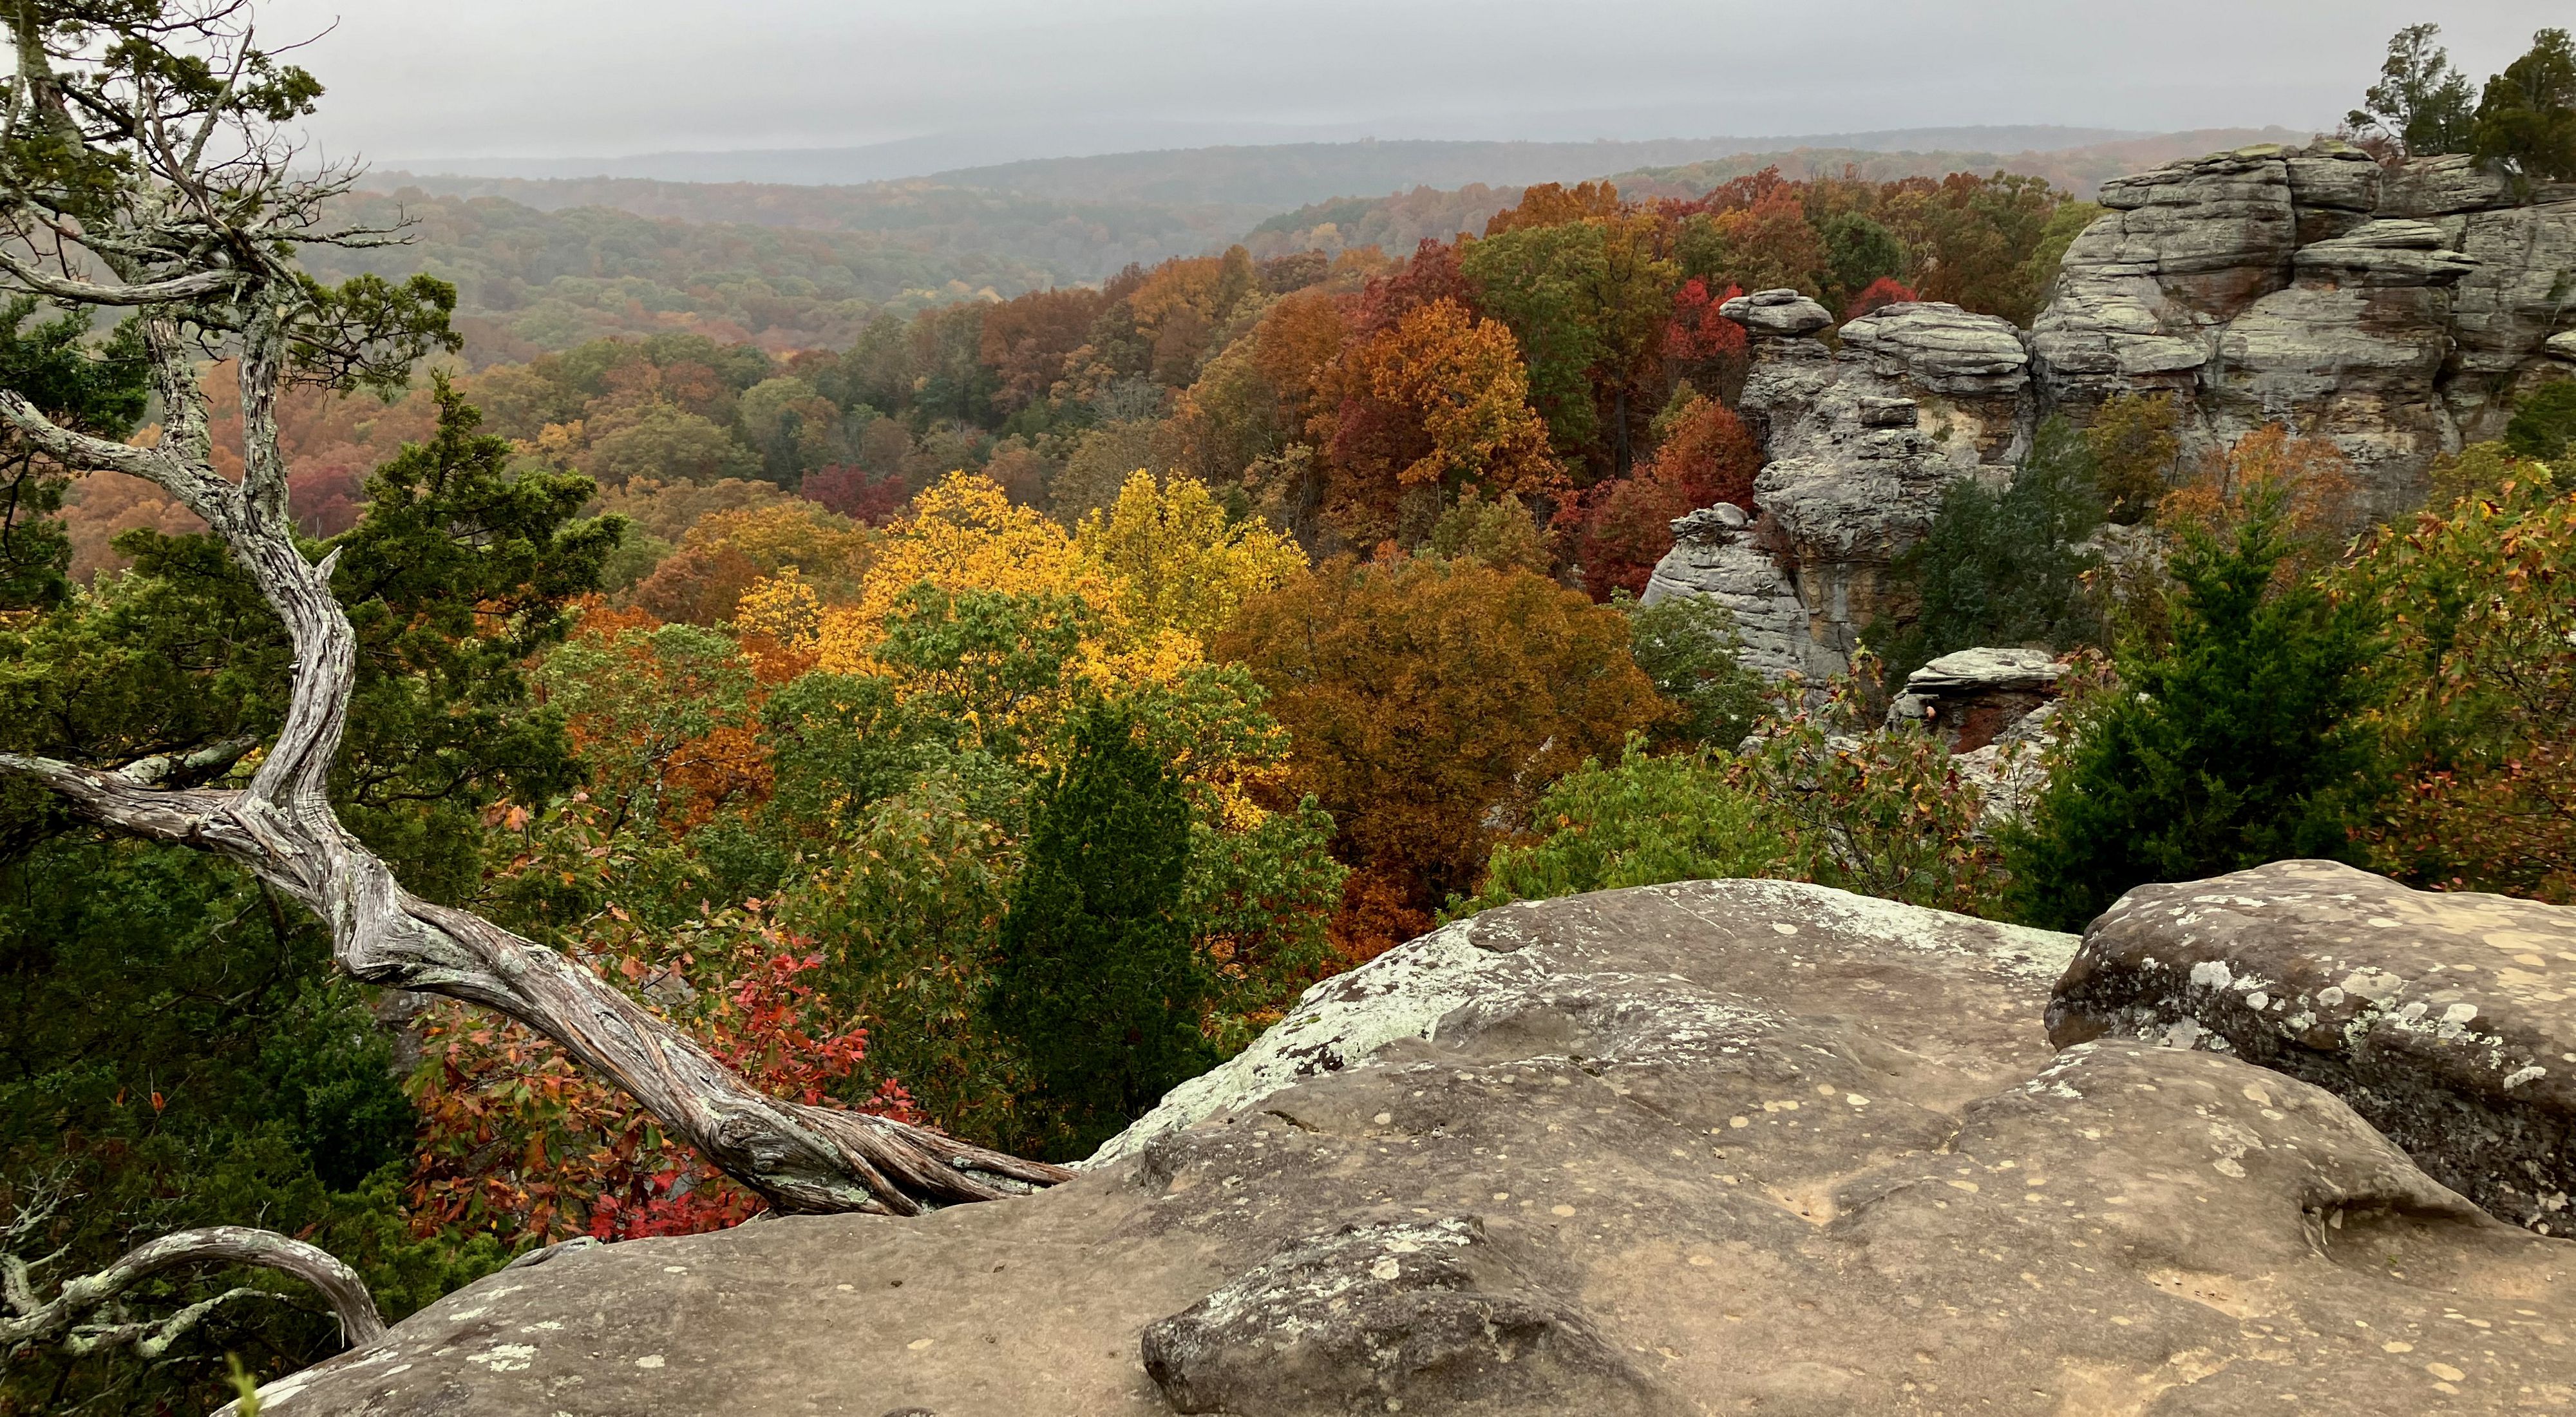 Located in the Shawnee National Forest of Illinois.